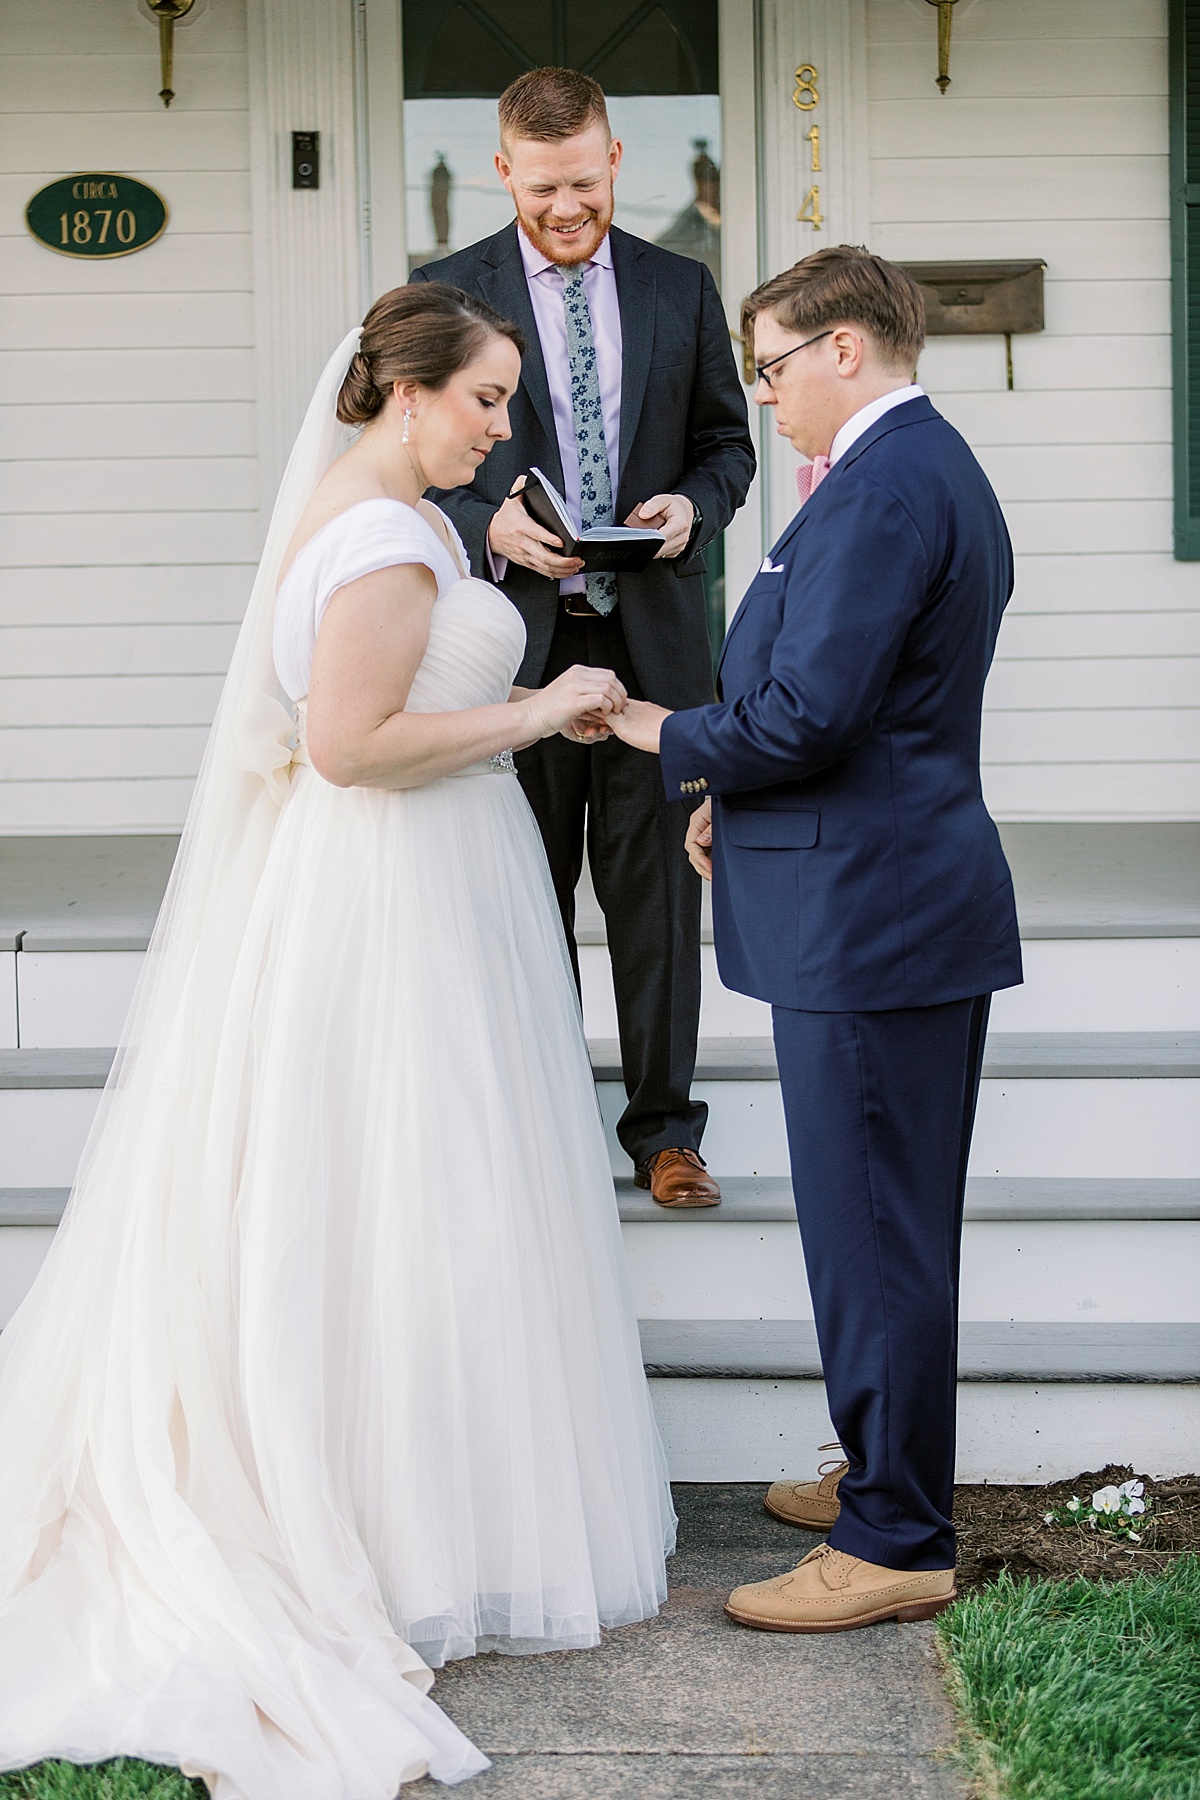 Micro wedding at a private home in Herndon, Virginia | Abby Grace Photography